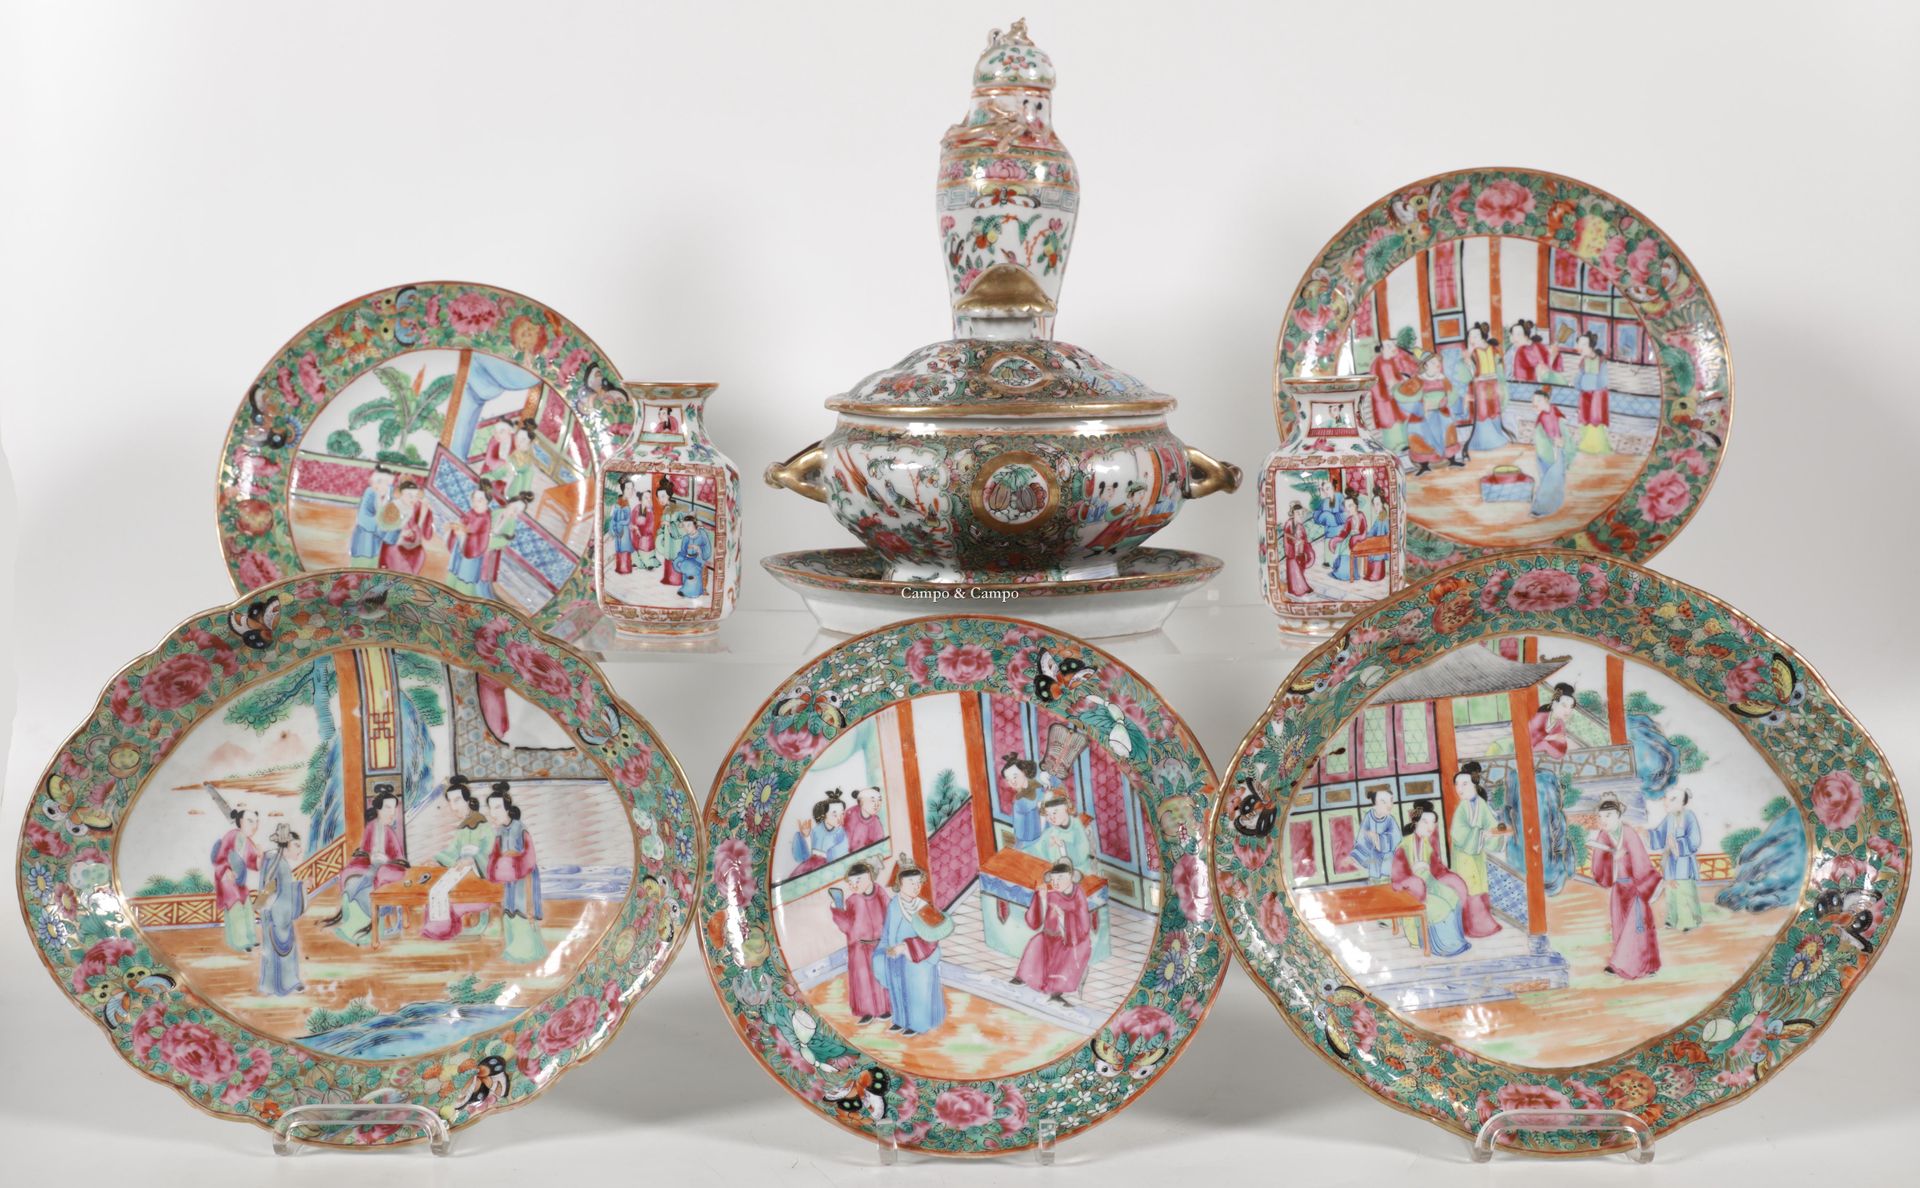 VARIA Varied lot of Canton porcelain including two dishes, two vases, a small va&hellip;